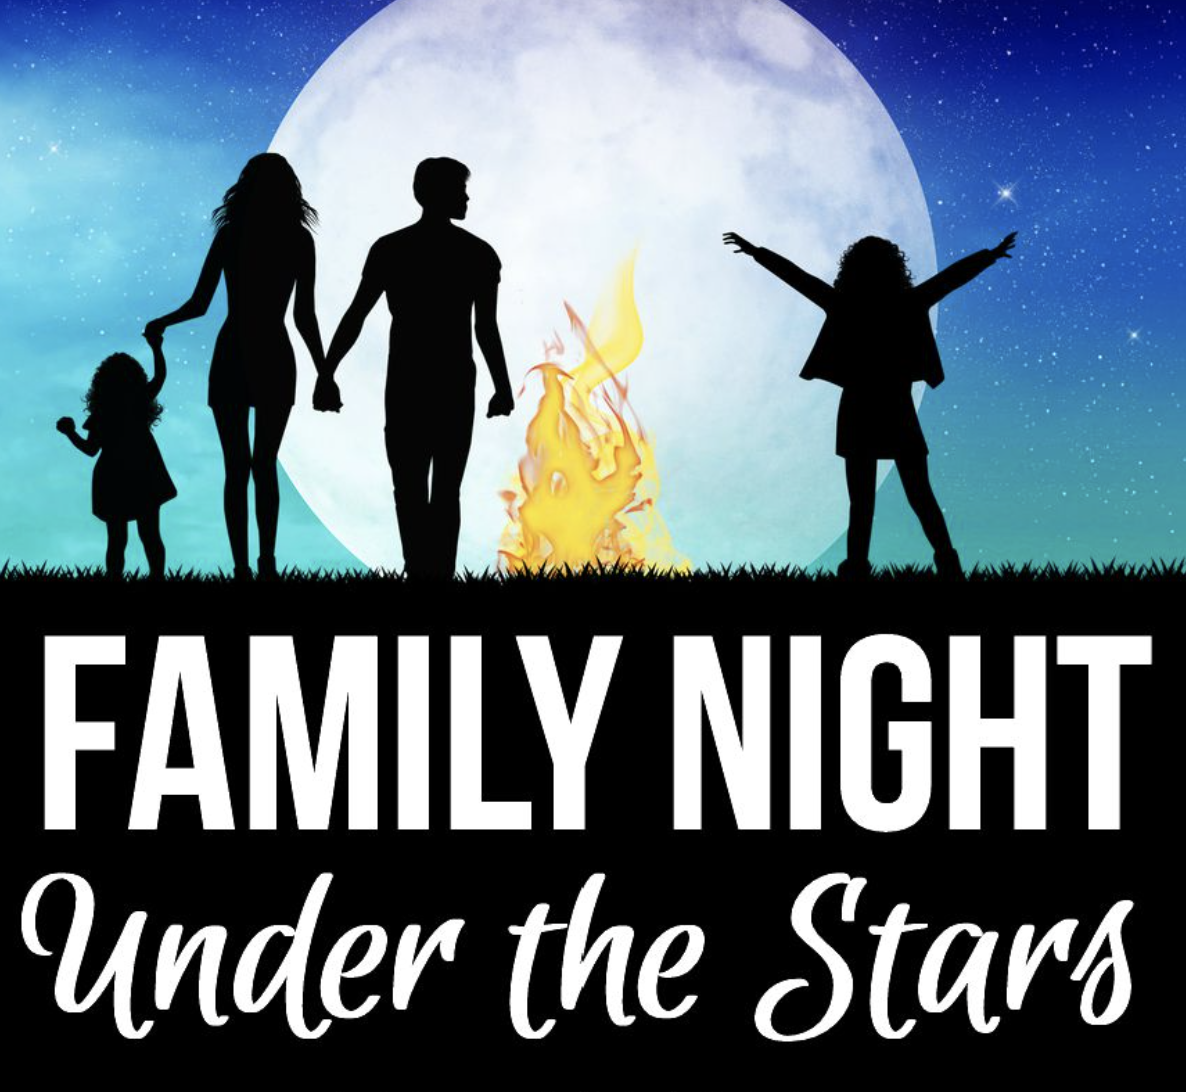 Image of a blue starry night sky with a large moon in the center and a silhouette of a 4-person family in front of it standing beside a campfire. The white words "Family Night under the stars" appear below the family.